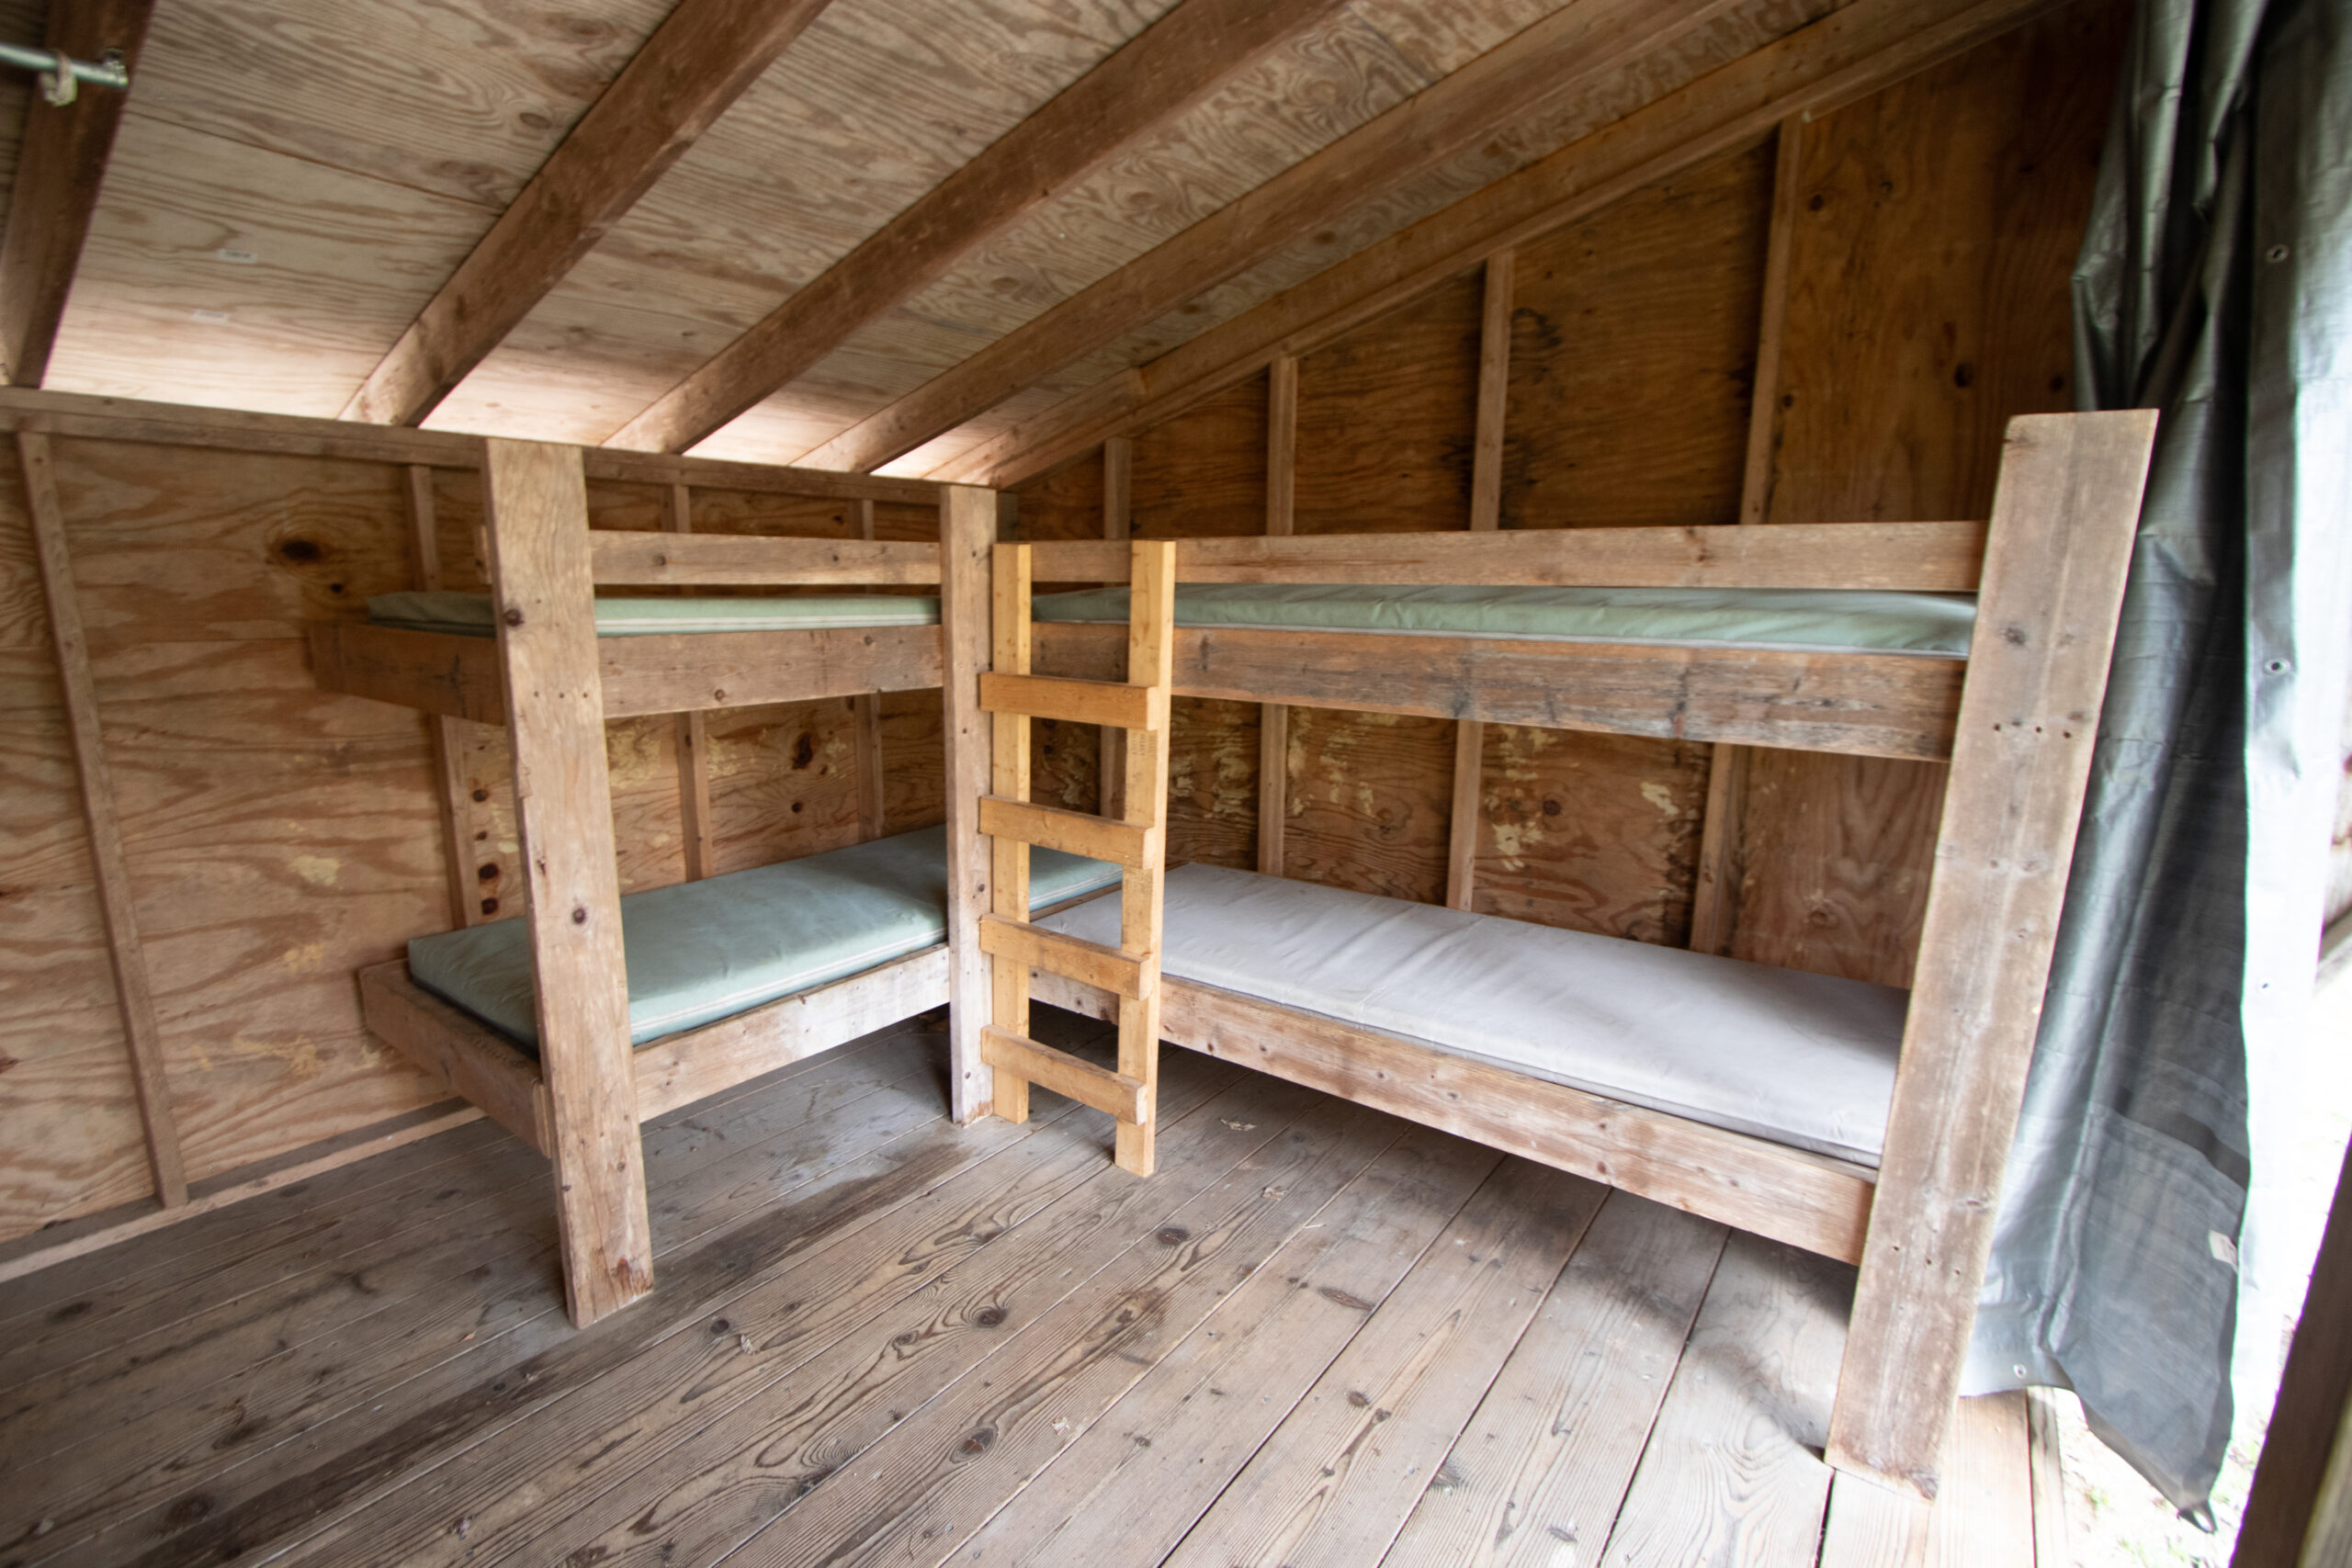 We have 17 of Lean-Tos scattered throughout our site, with 6 beds available each on a first-come, first-serve basis. Lean-Tos are popular for group encampments but also make excellent sleeping spaces during warmer months. Lean-Tos do not come with electricity or heating.